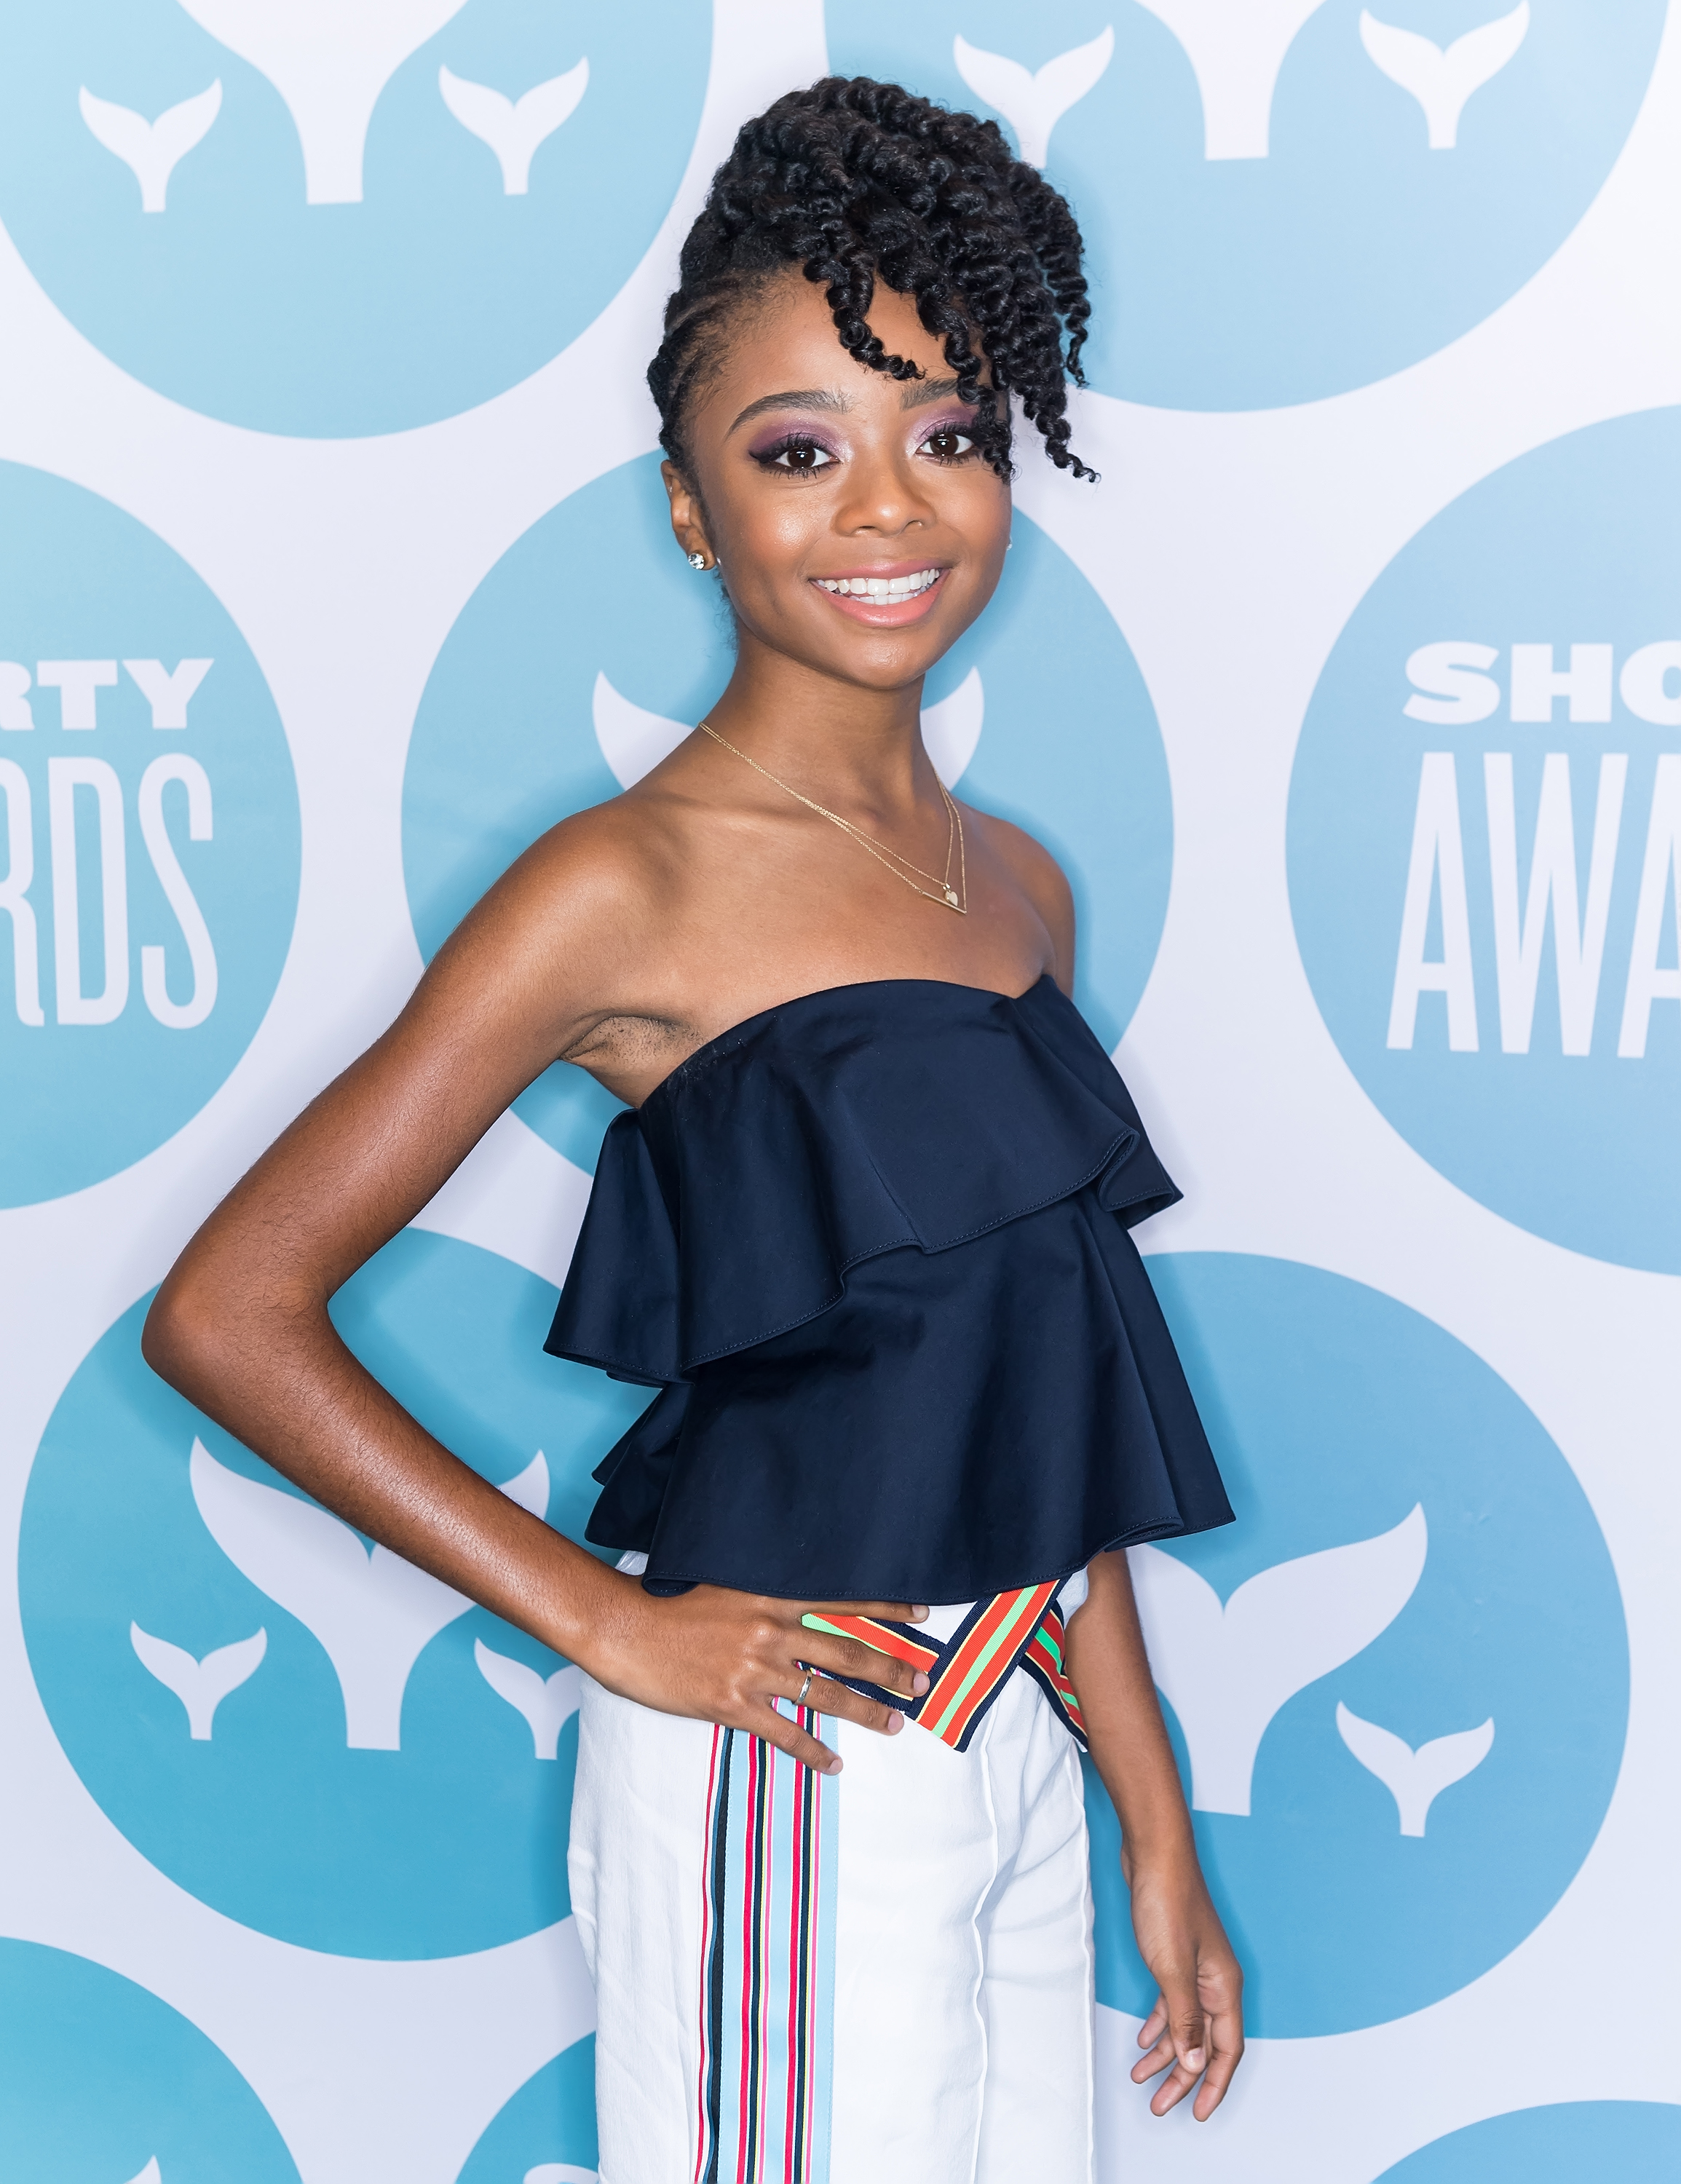 How Old Is Skai Jackson Again? This Girl Is Seriously Mature for Her Age